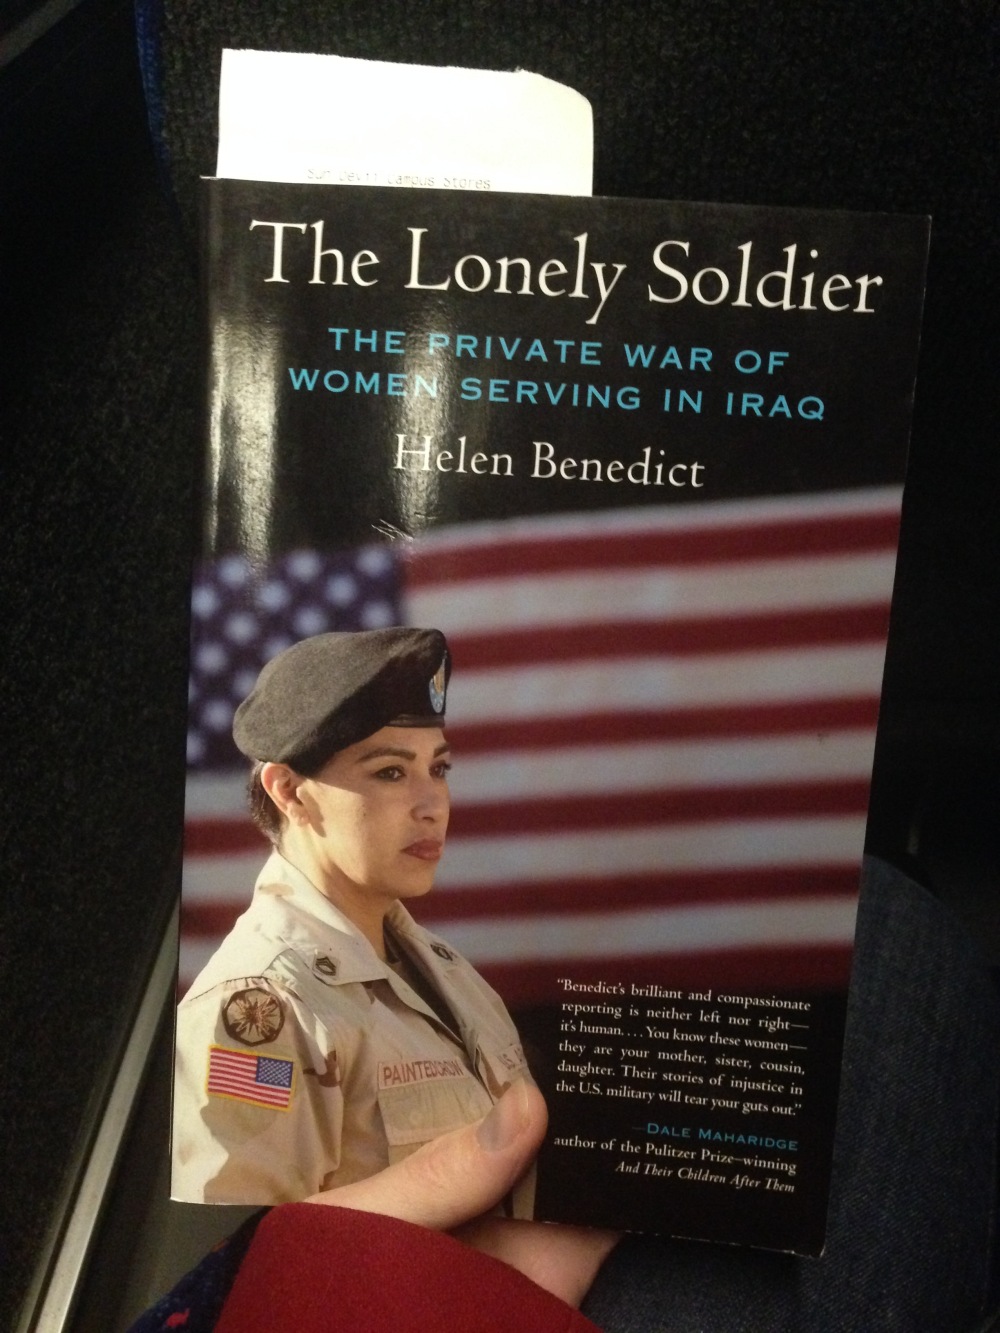 The Lonely Soldier....I could do without the generic label of soldier to define service members, but let's hope the rest of the book is  good.